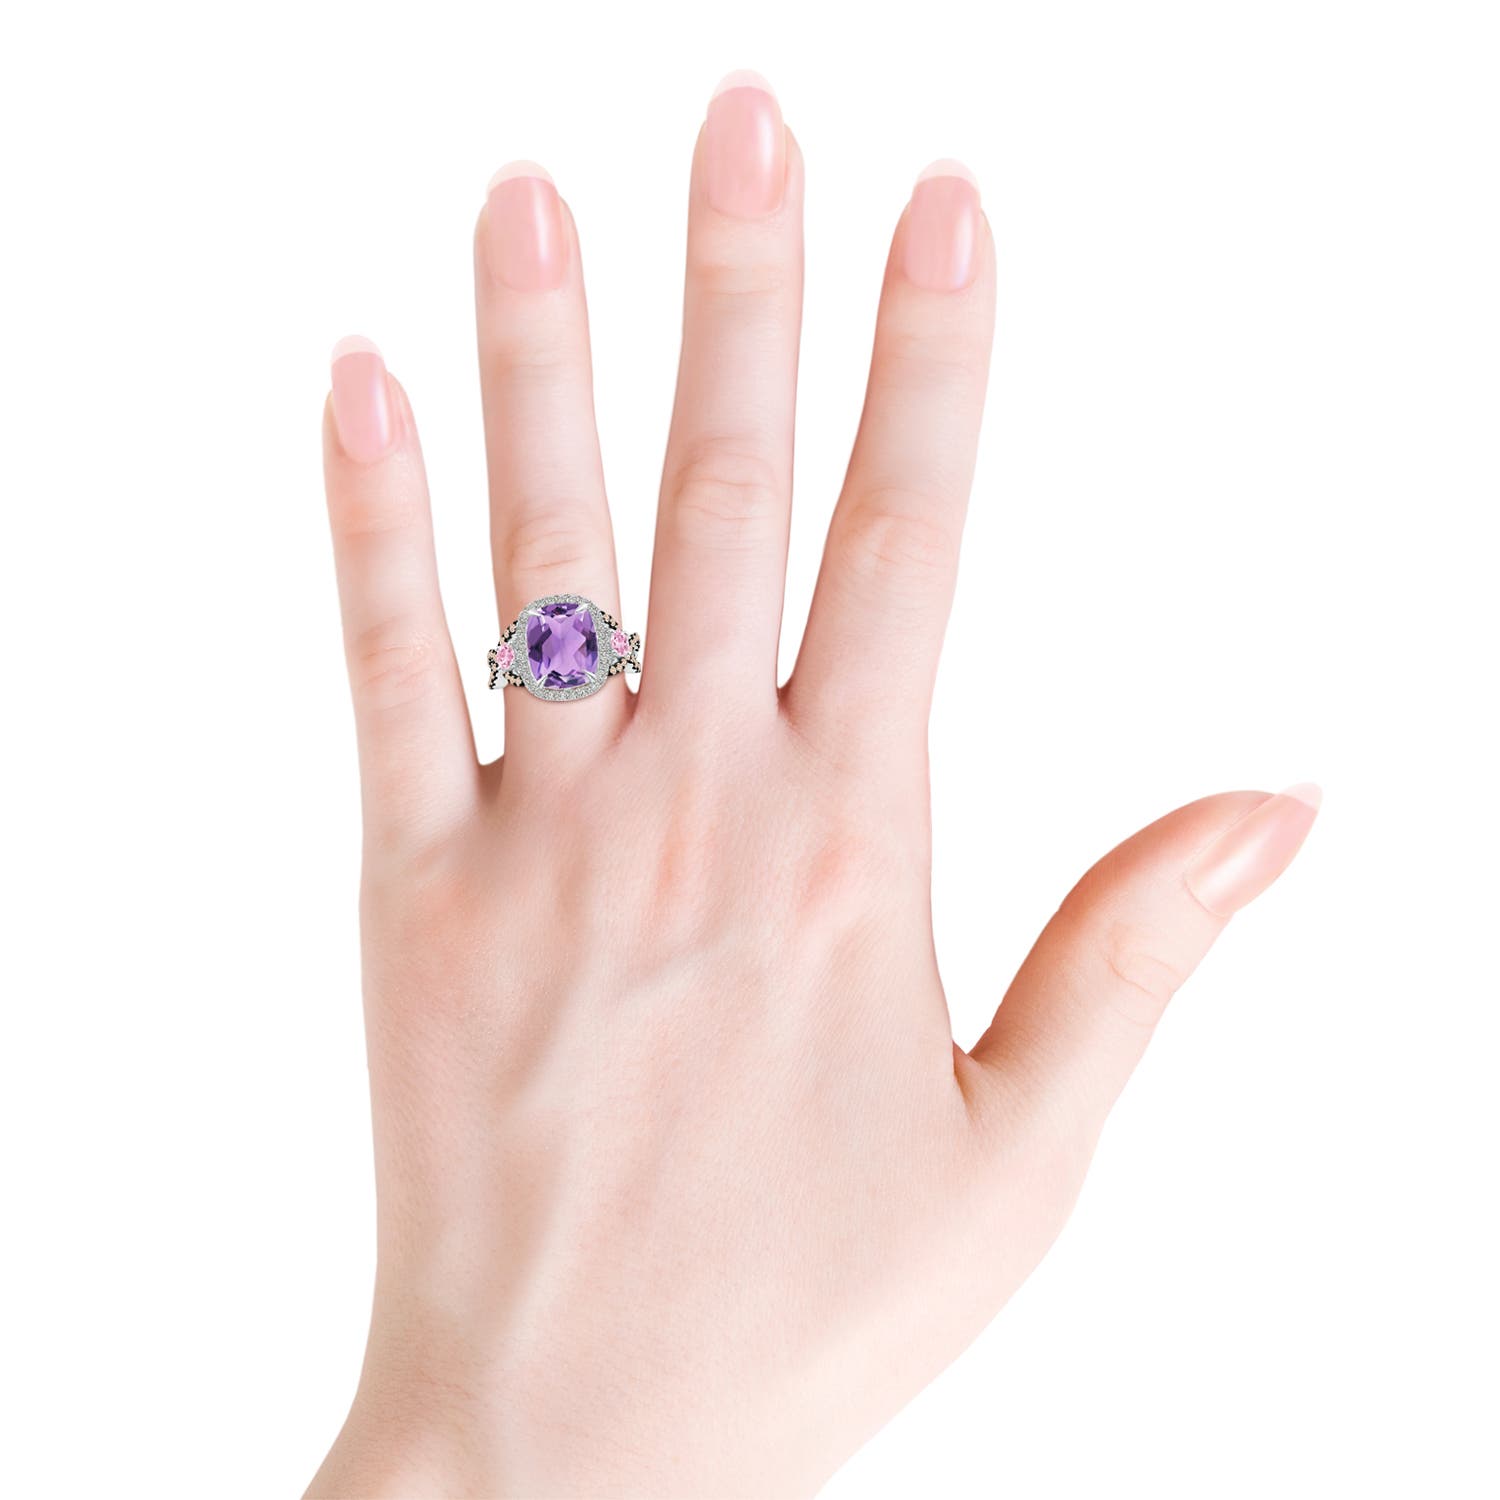 A - Amethyst / 4.4 CT / 14 KT White Gold